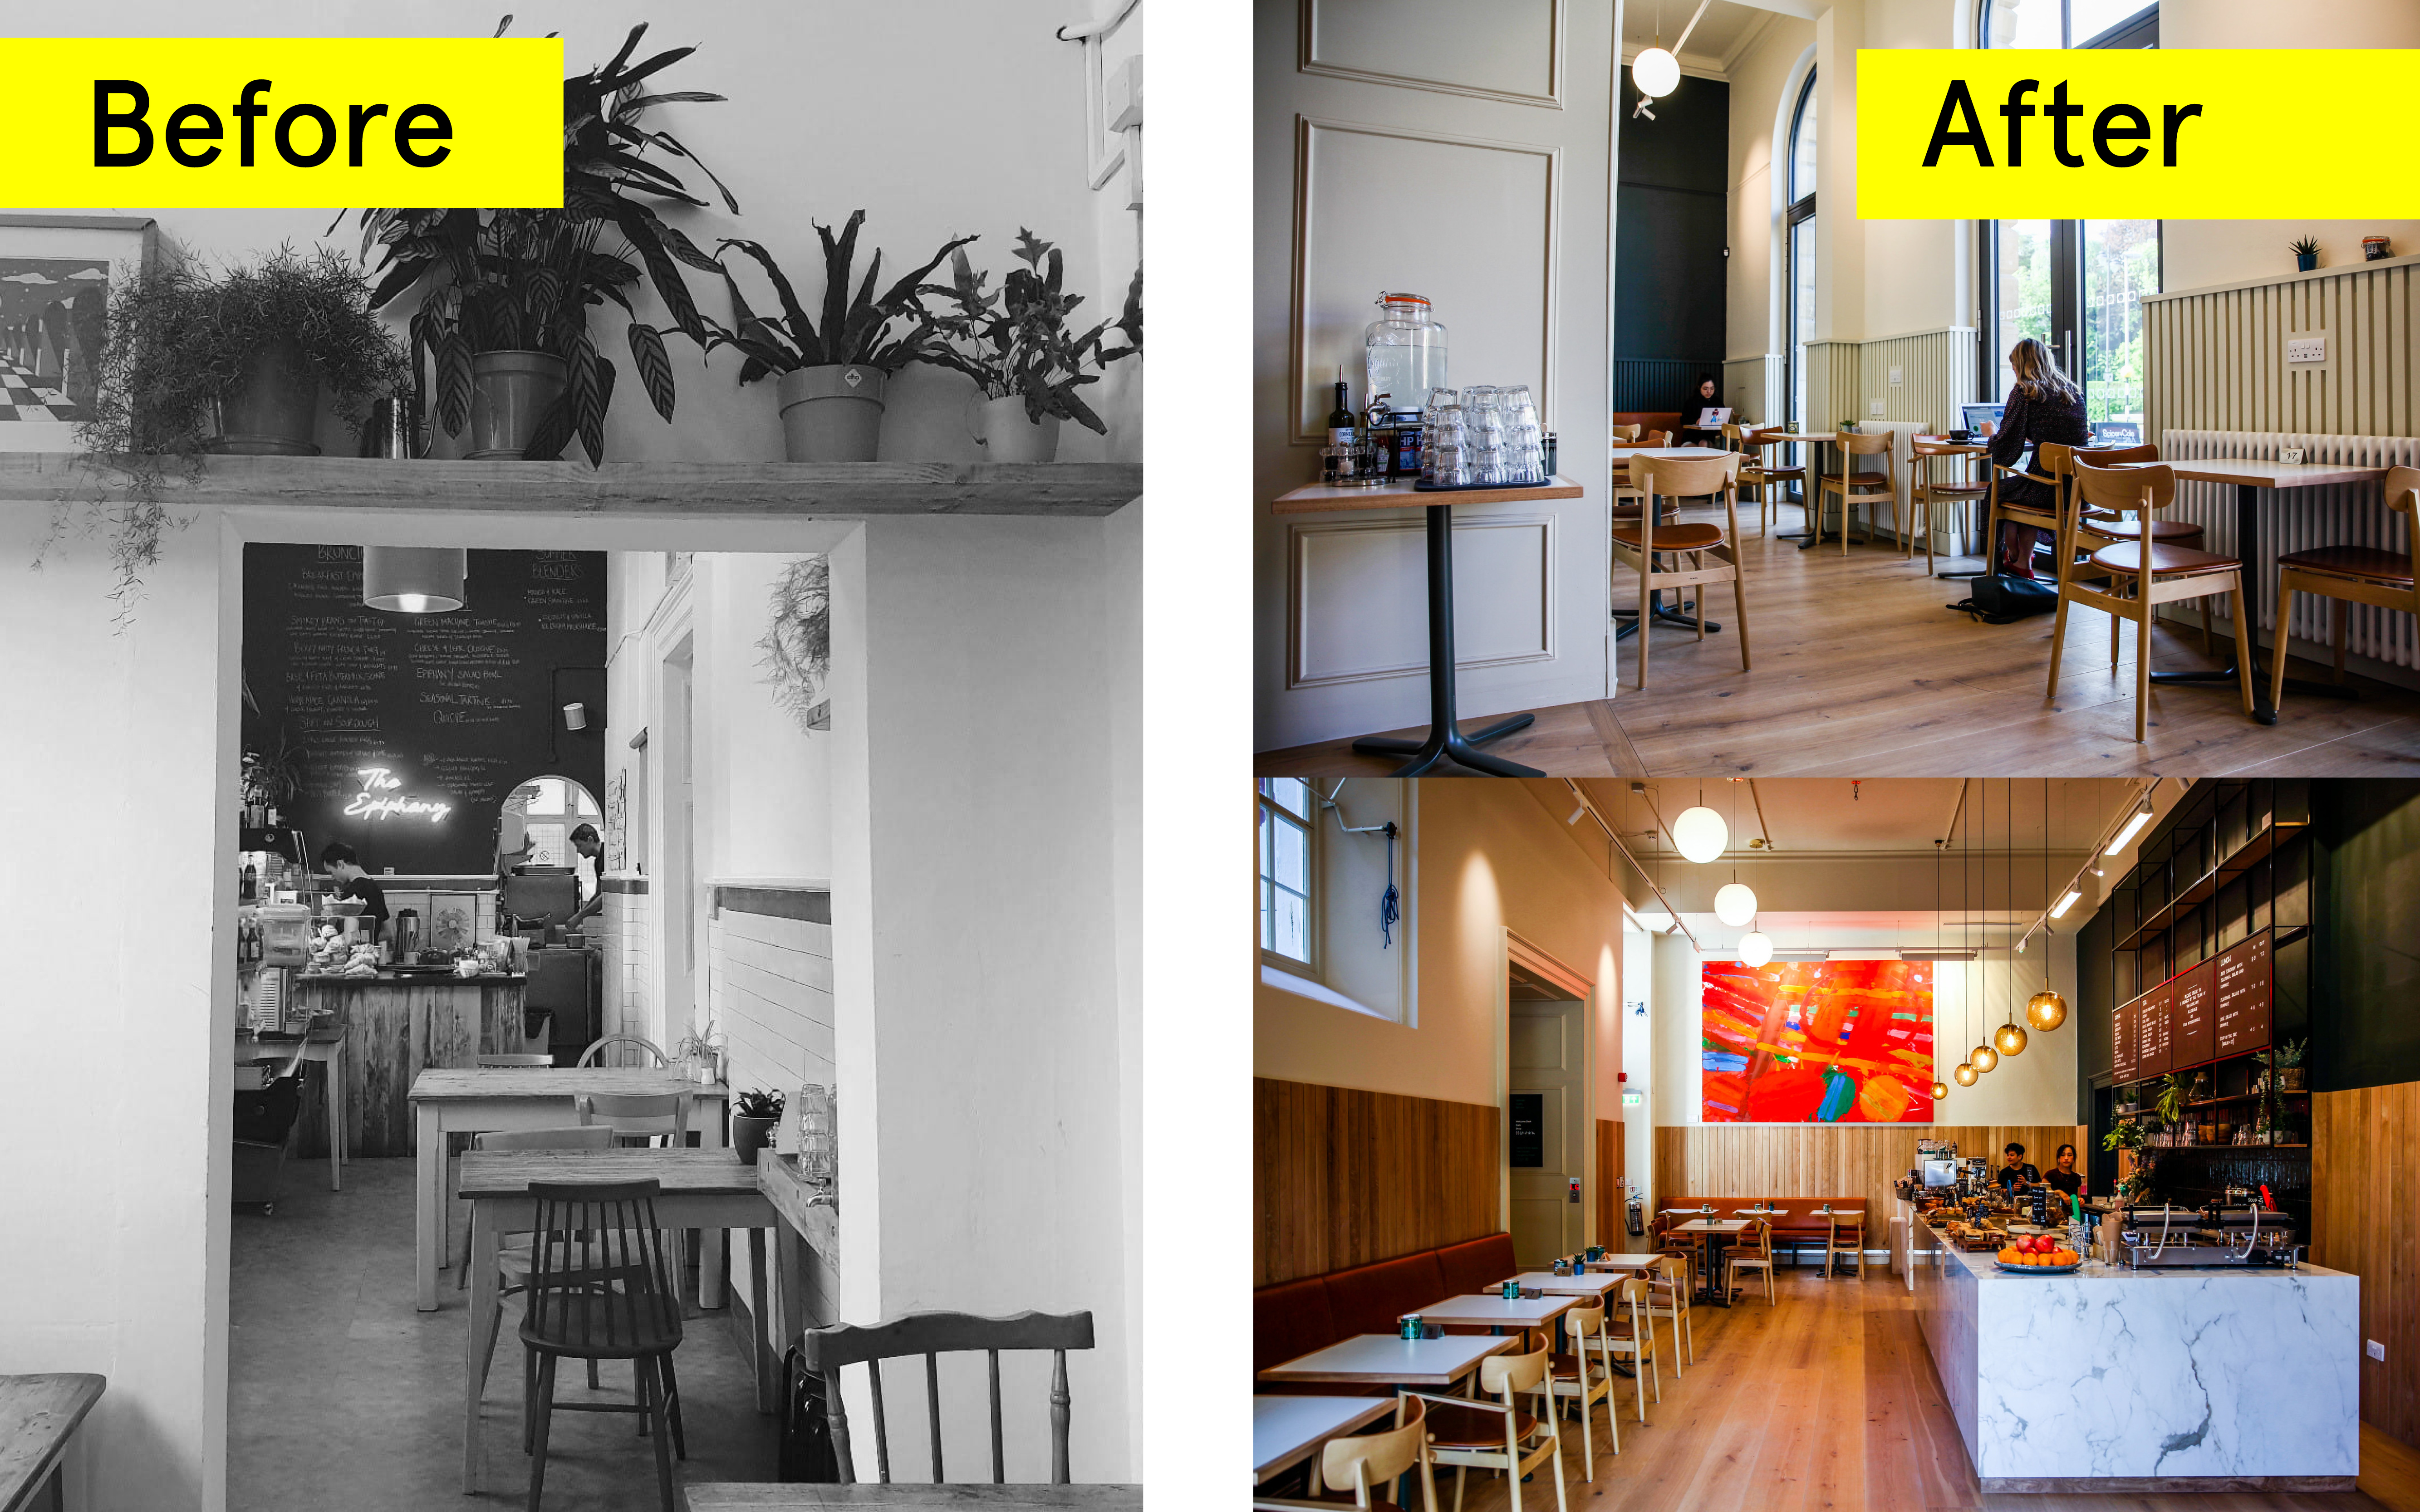 3 photographs of the RWA cafe. On the right hand side a greyscale photo of the old cafe and on the right two photos of the new cafe after the building transformation 